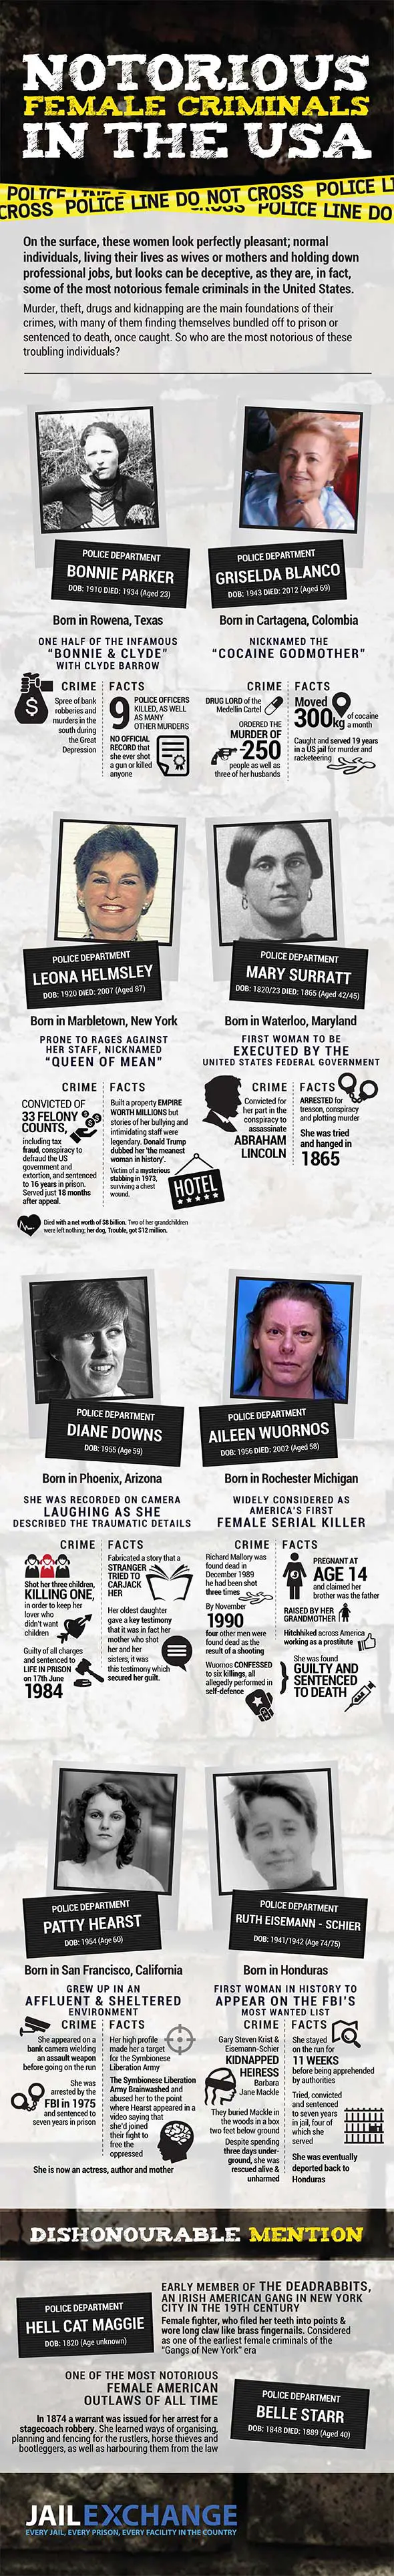 Some of the most notorious female criminals in the US